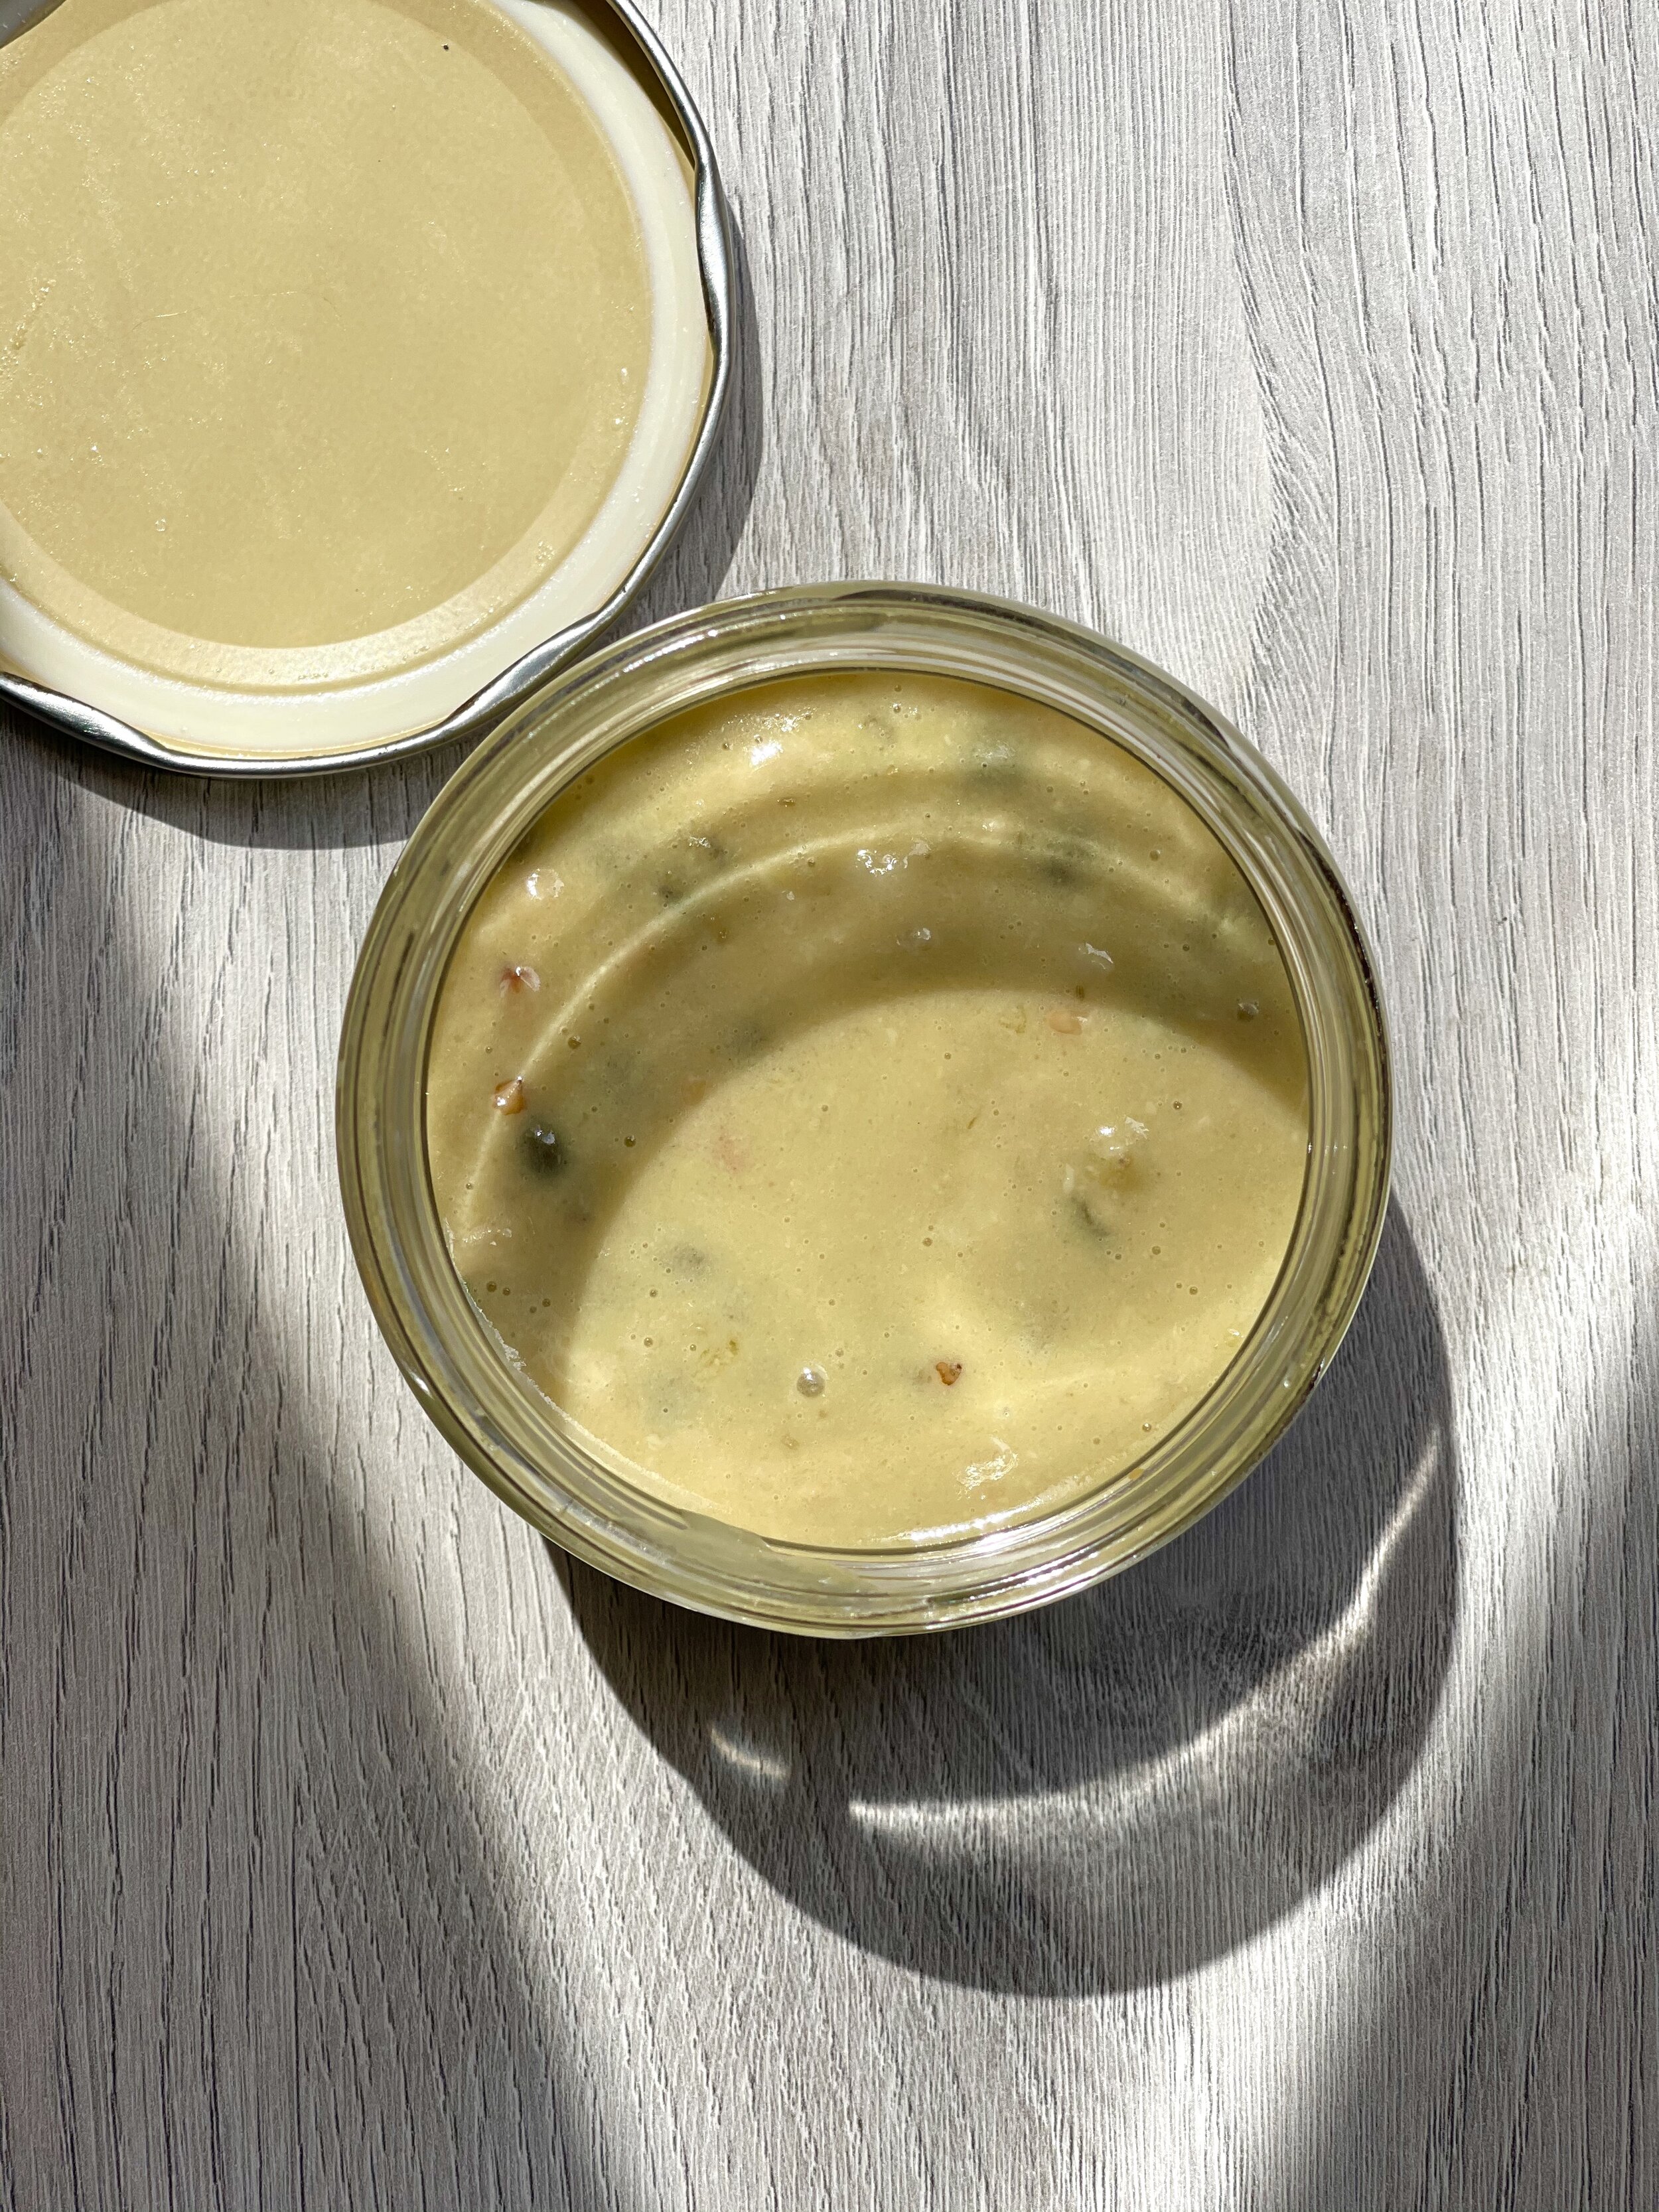 Joey and Katy's flavour hack dressing